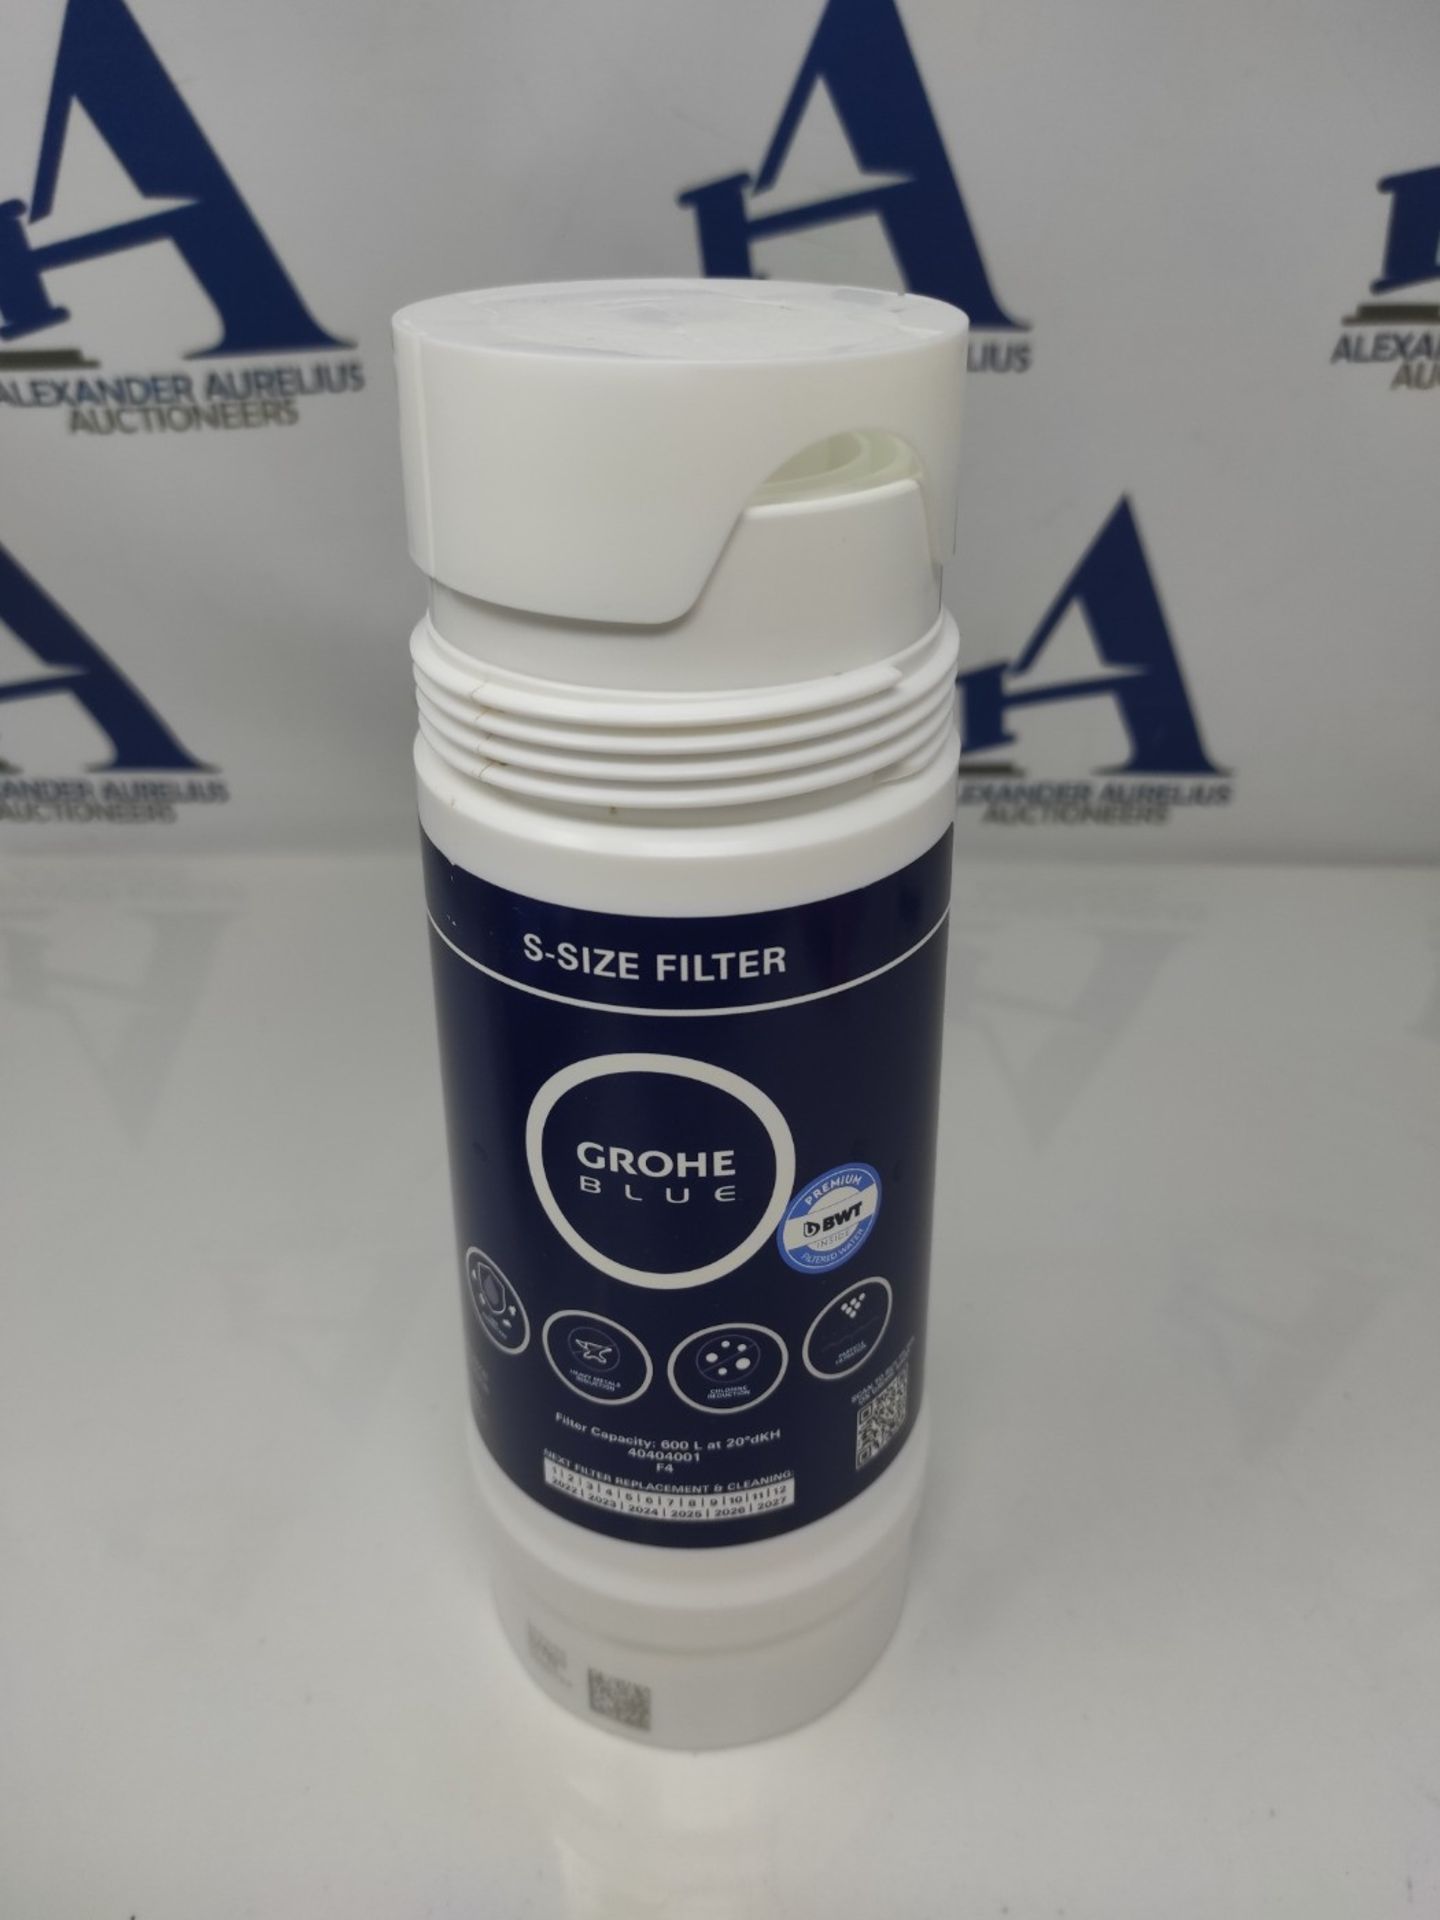 RRP £66.00 GROHE Blue - Replacement filter (S-Size, 600 liters at 20° dKH, 5-stage filter), 4040 - Image 3 of 3